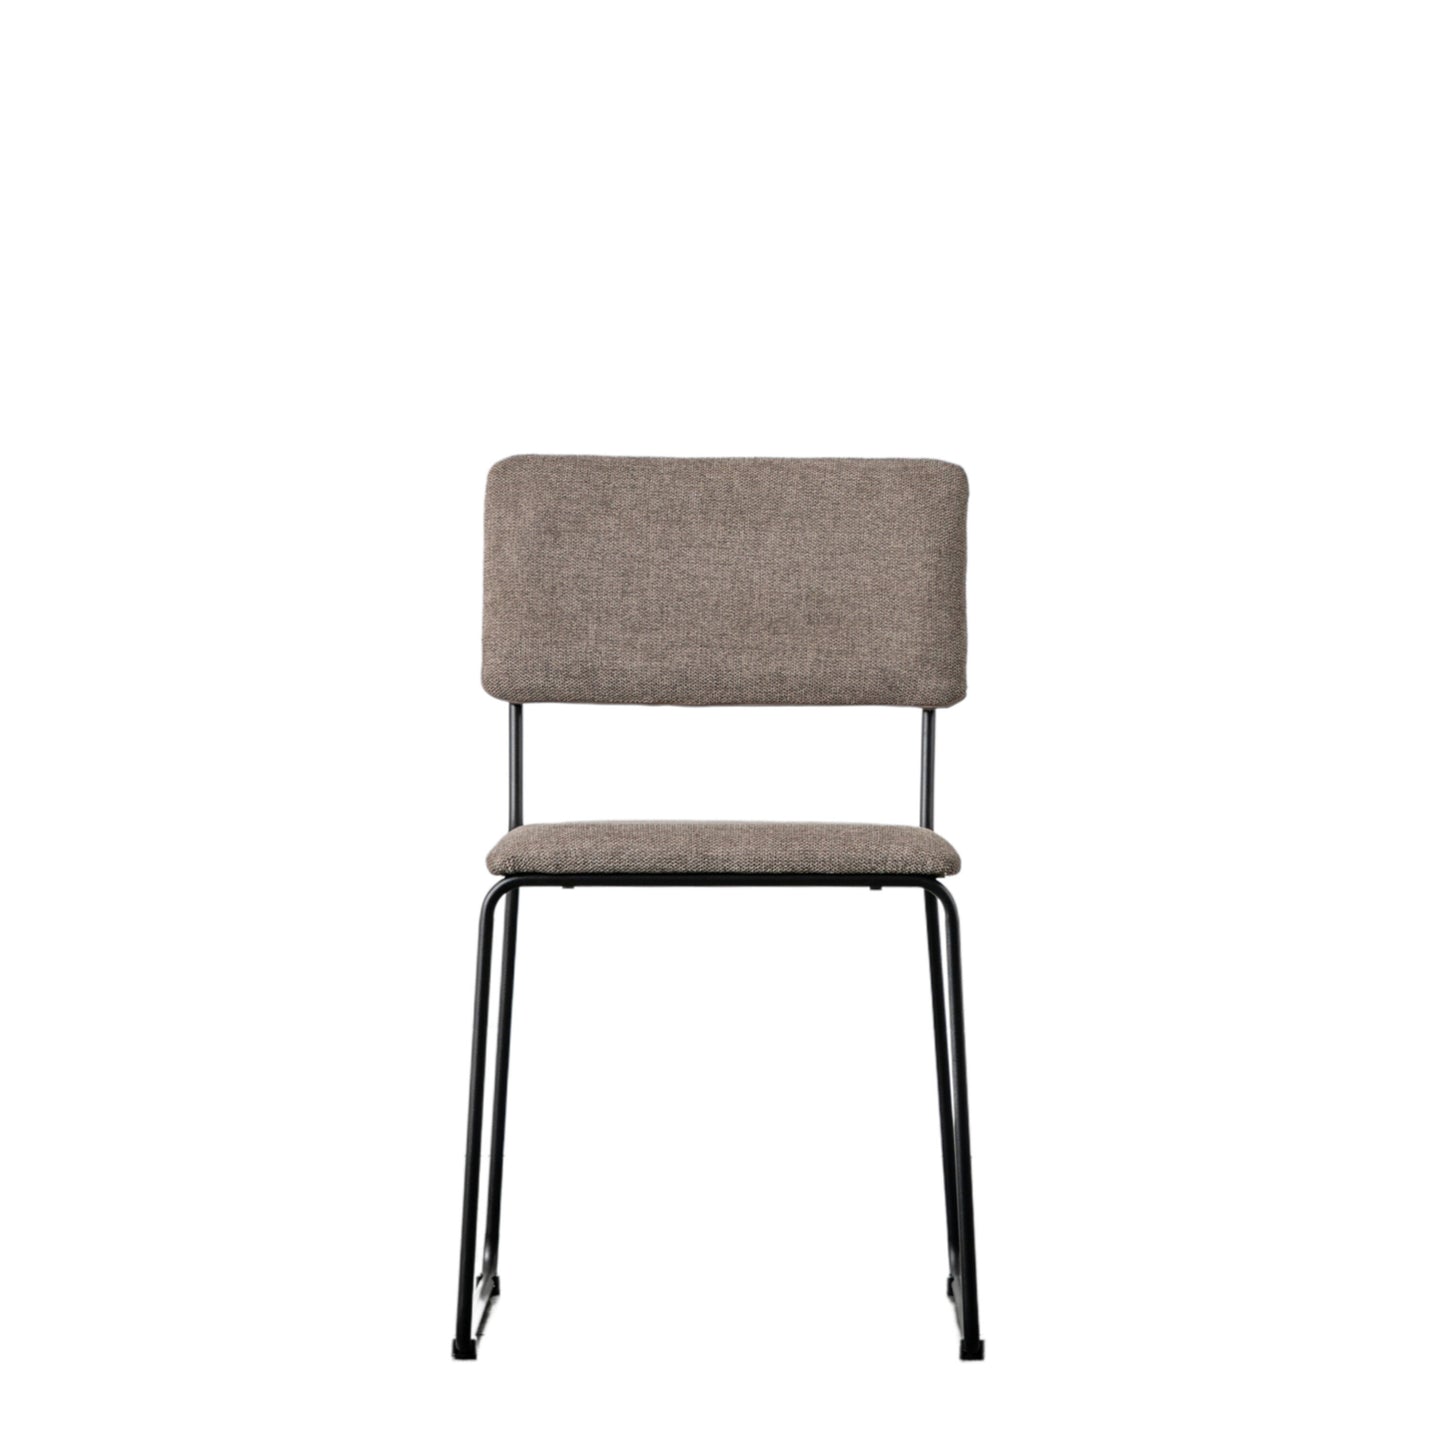 Chloe Fabric And Metal Dining Chair | Chocolate (2 Pack)